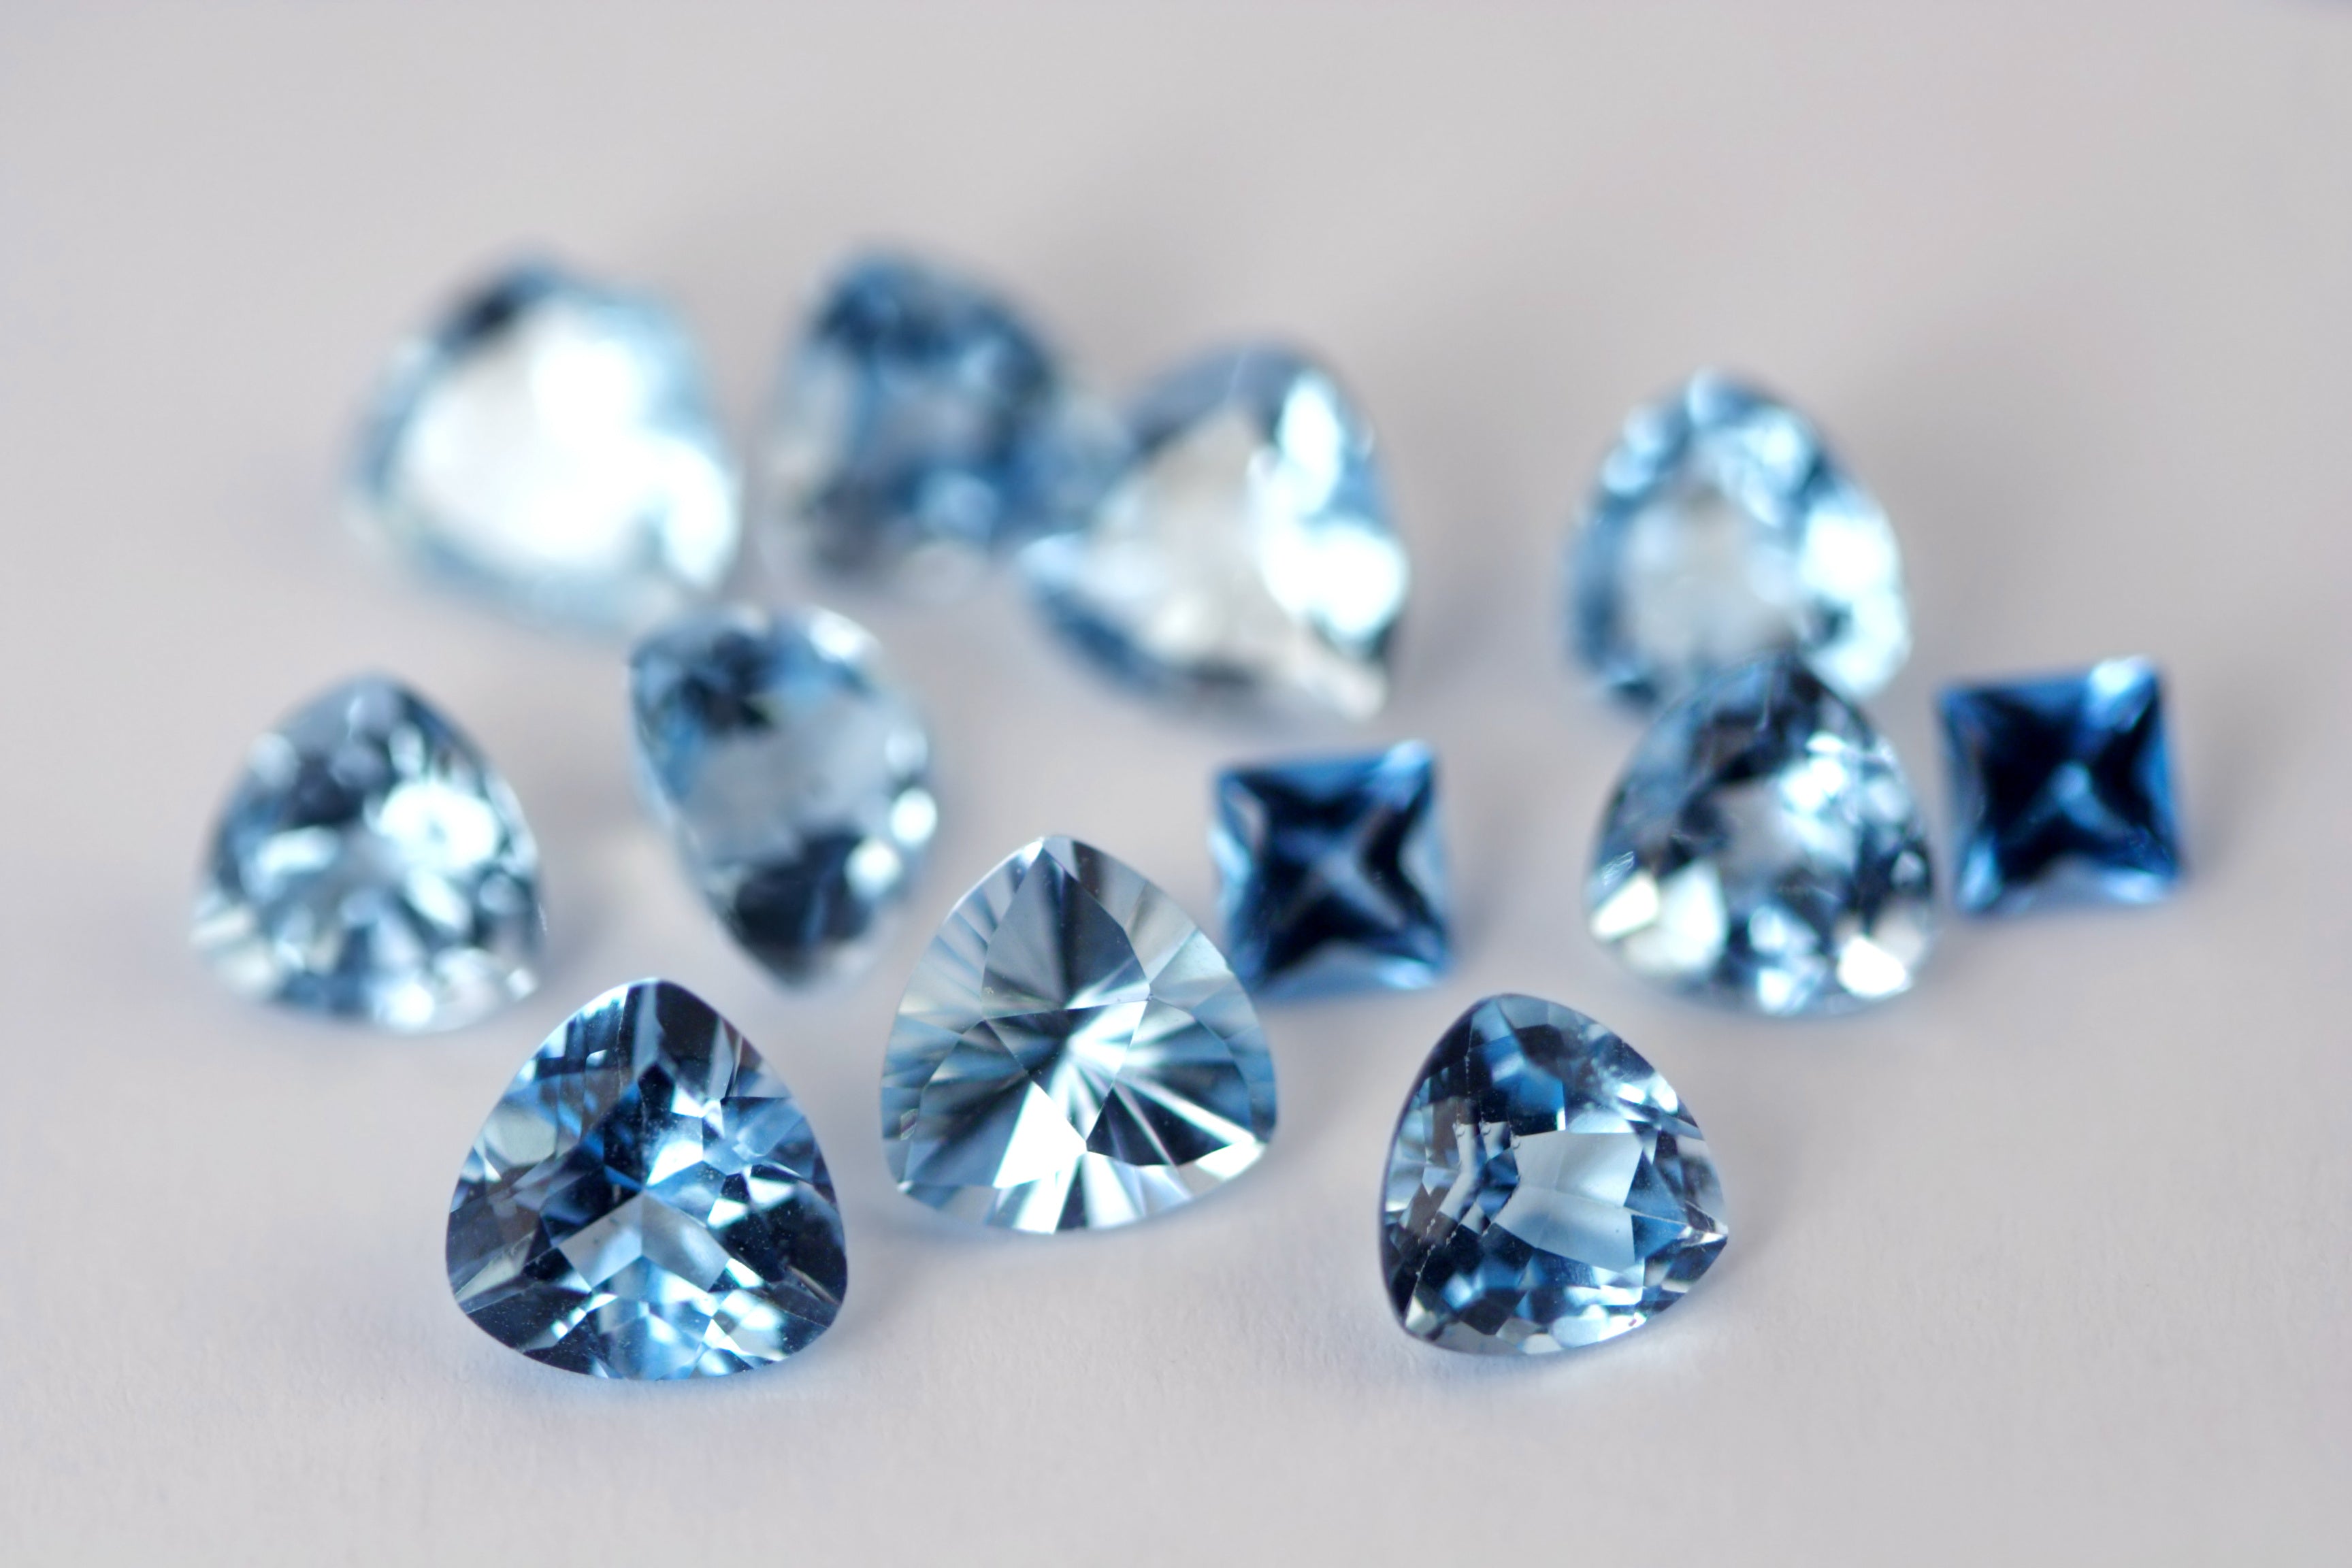 Sapphire vs. Diamonds: What's the Difference?